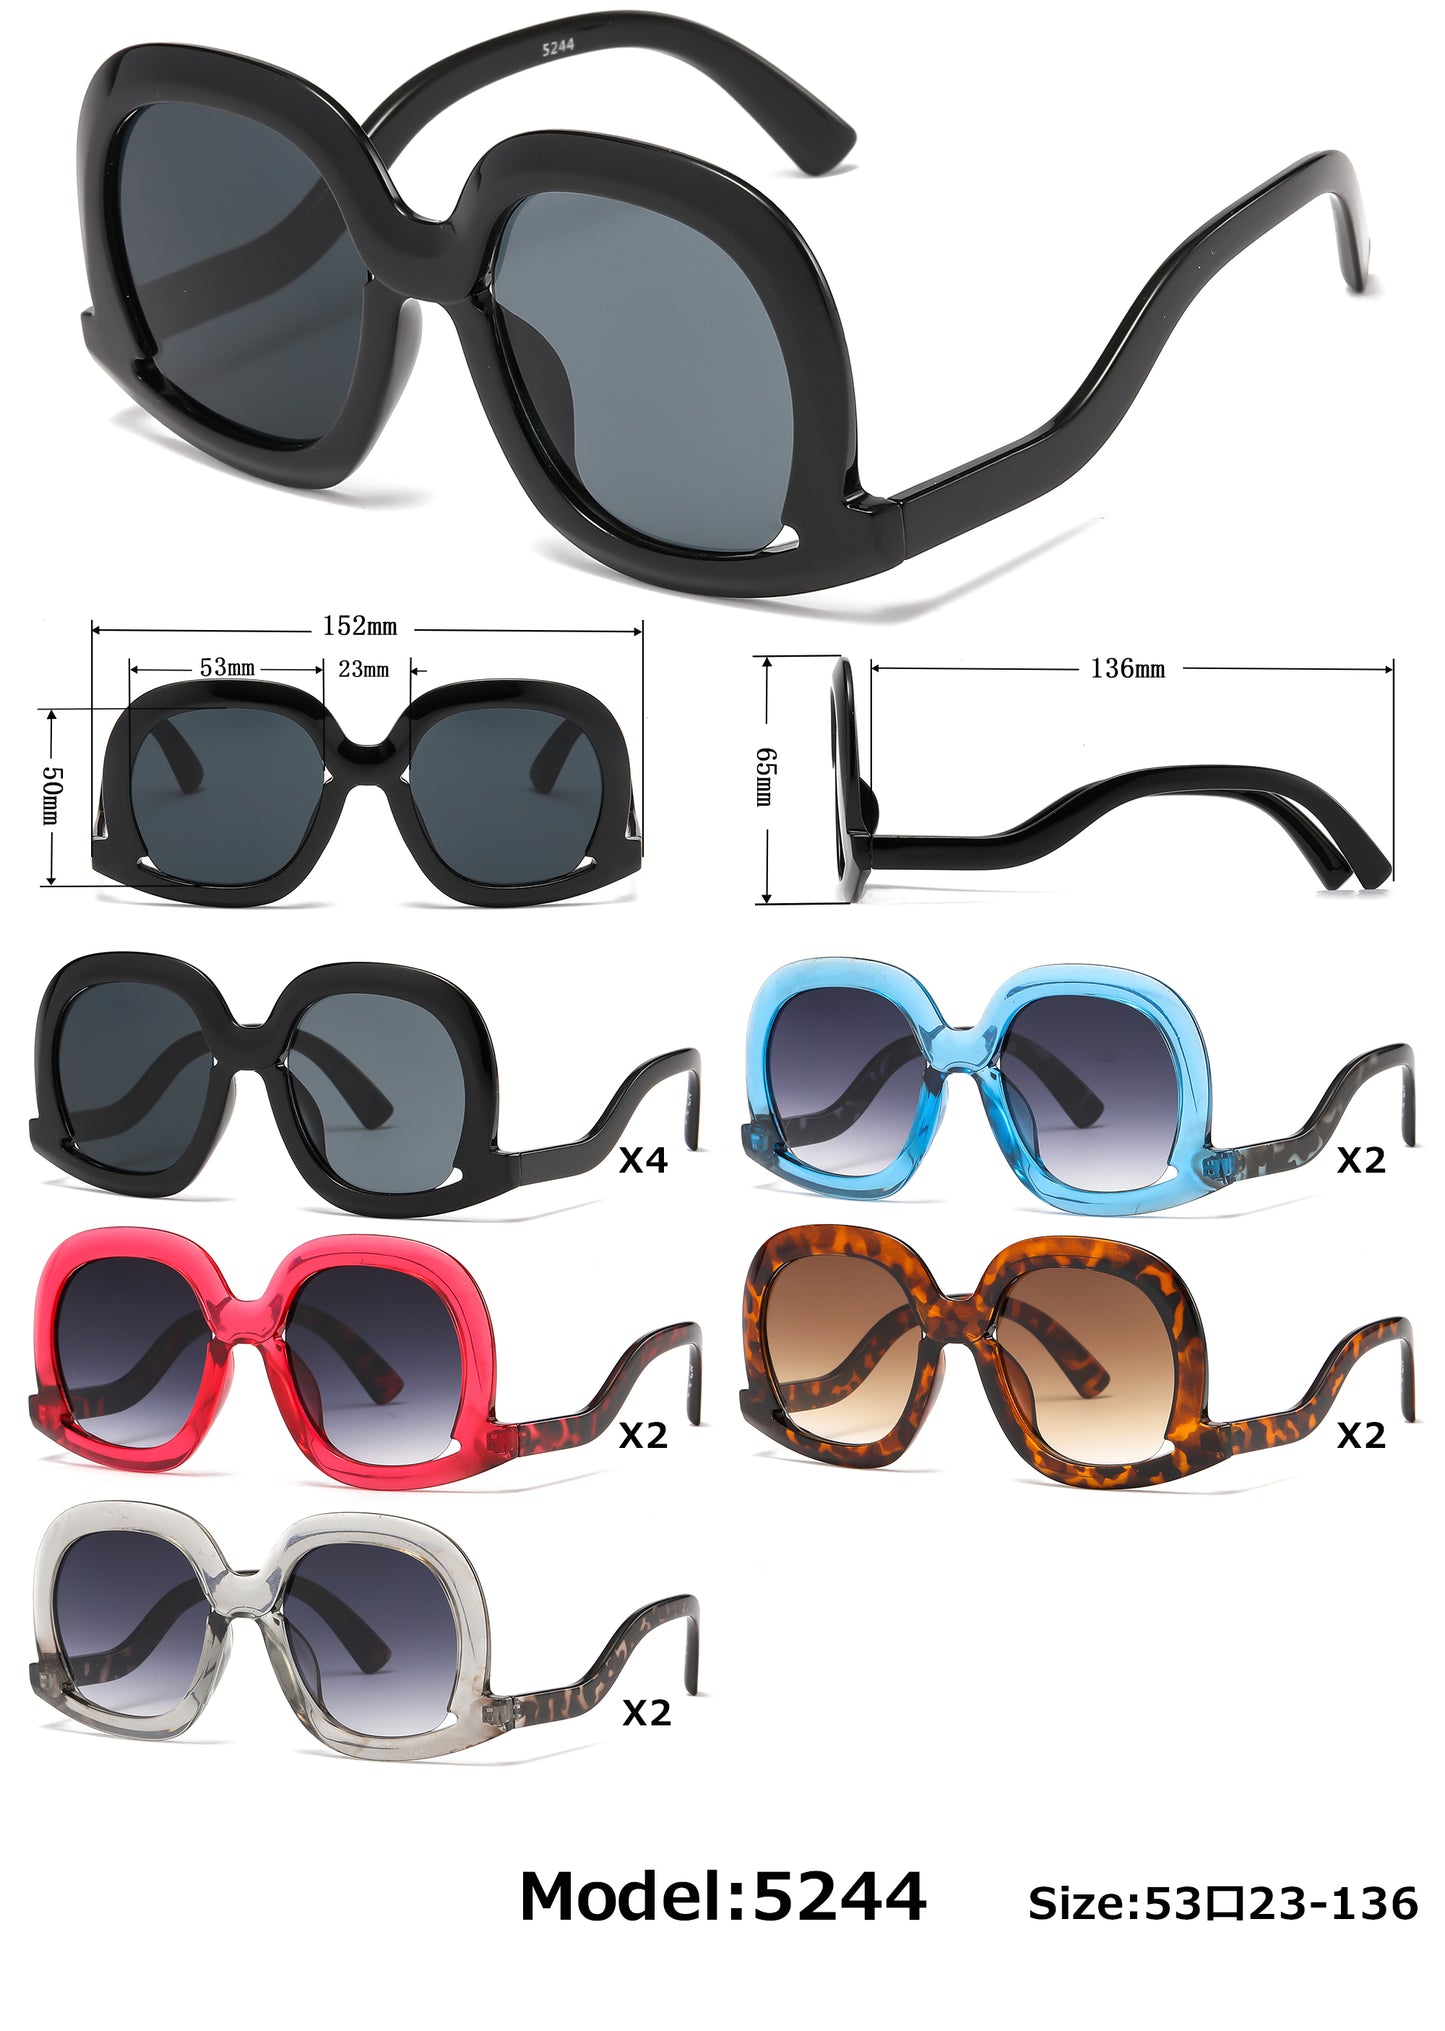 5244 - Fashion Plastic Sunglasses with Curved Temple